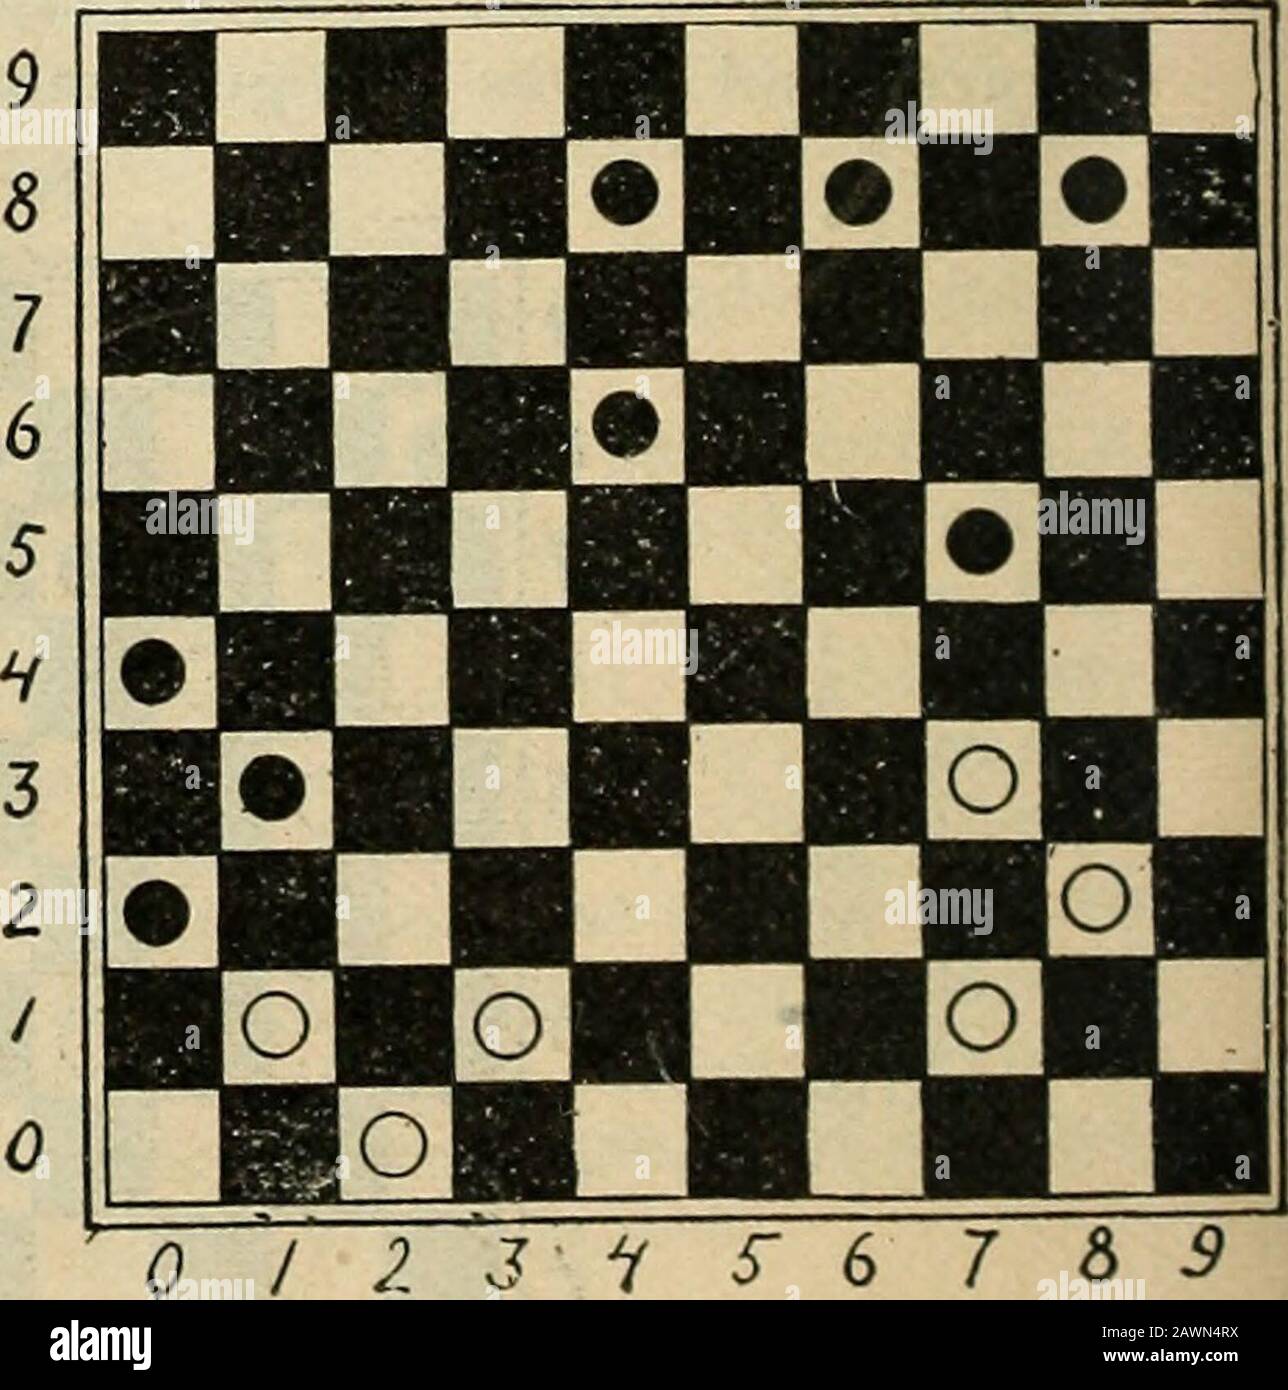 Checkers; a treatise on the game . the student. No. II. 9 6 7 3- 45 3 6 35—40 5 57 35 59—68 79 57 4 51-60 73-51 5 60-68X1 84 75 J, o ??? 4^ ^ ? ? ?? ? • ? ^W  N ? ? B ?jt^ ? ??? ? ? ??? ? B s ?K &gt; 68- 7 75 64 (— - 8 64 5 8- - 9 5 46 9- - 4 46 37 4- -17 hite wins 0f25&567&9 40 CHECKERS. No. III. No. IV. ? ? ? ? ? ? ? n ? s ? ? ?^ ? B ? ? n opl ? ? ? o 2M ? ? ? V ?? ? ? ? V ? ? ? ? . 11 ? ? ? ? ? ? ? ? • ? • ? ? ? D ? ? ? ? 0? ?? 0 ? 0 ? 0 ? ? 0 ? ? 0 ? 0? ? ? 0 •**r-- • 0JZ3iS6rdS 0 1 Z 3 i 5 6 7 8 3 51—60 68 46 59—68 15 3 73 51 42—53 7 59 31—42 60-42 64 42 37-48 3 51 80 62 31—97X5 59 37 2—3 Stock Photo